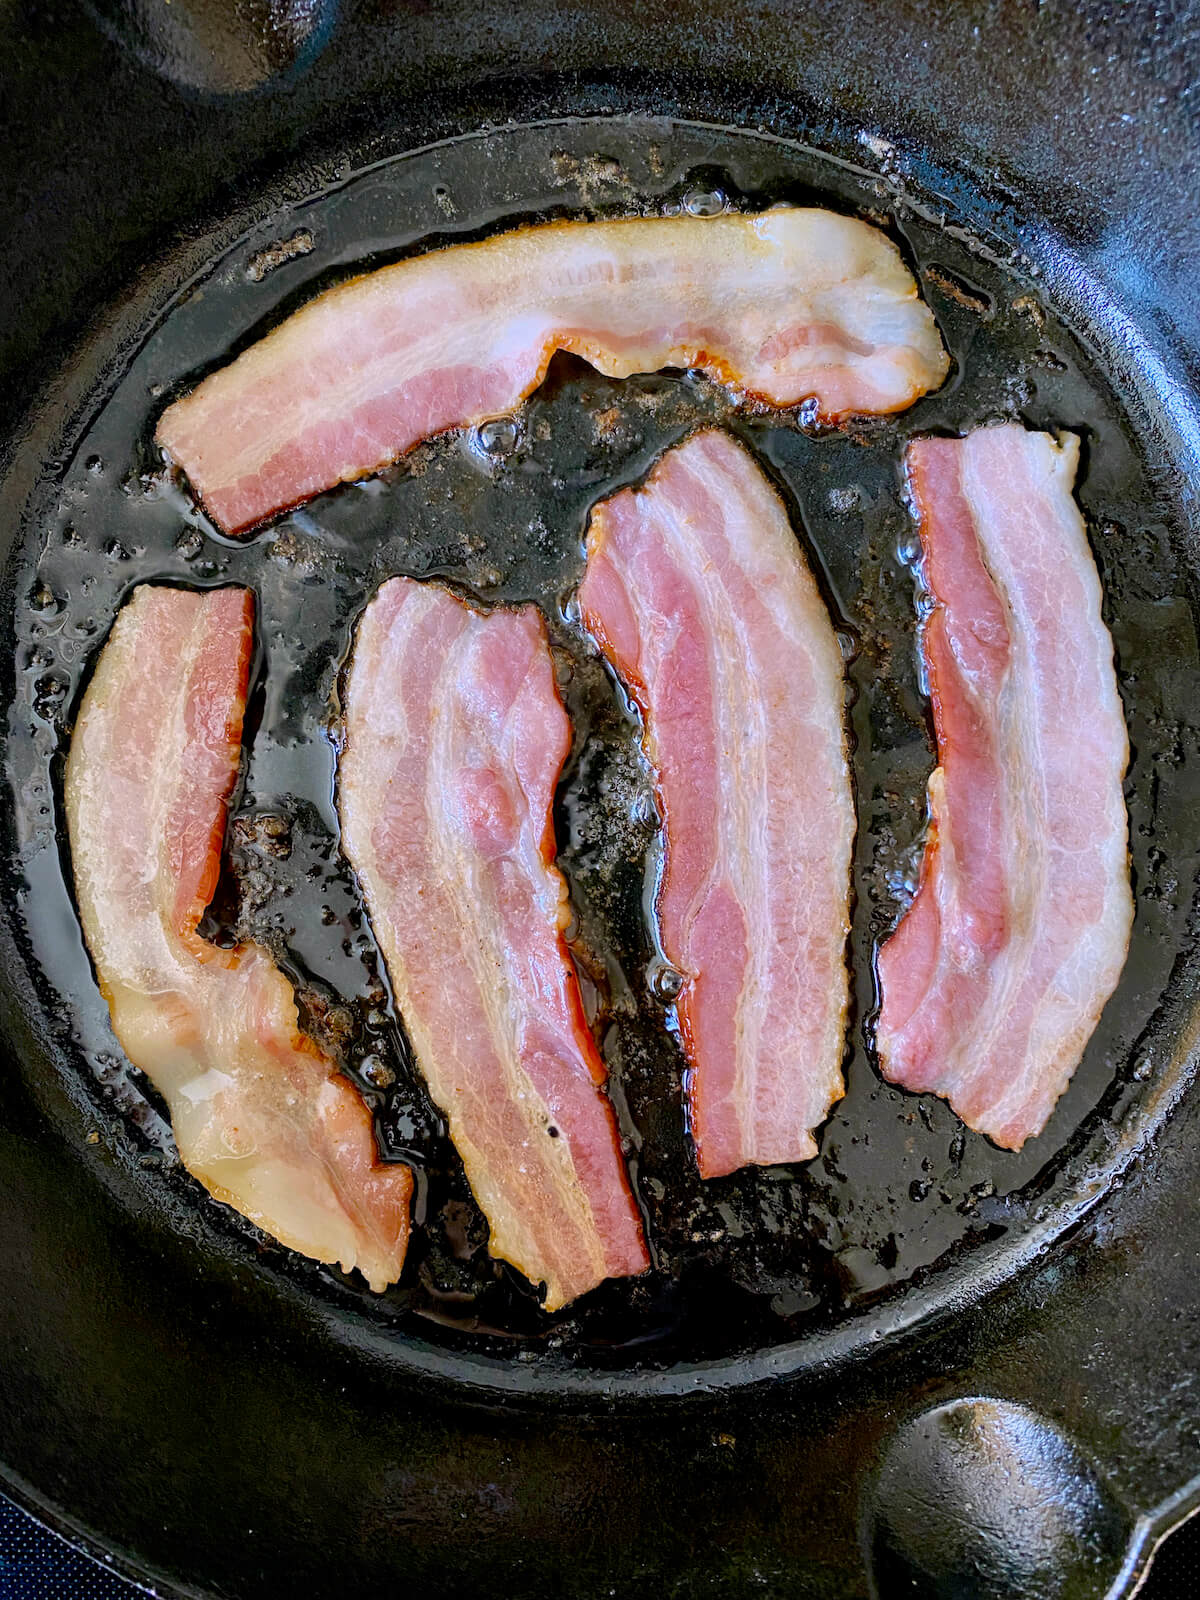 Partially cooked bacon in a cast iron skillet.